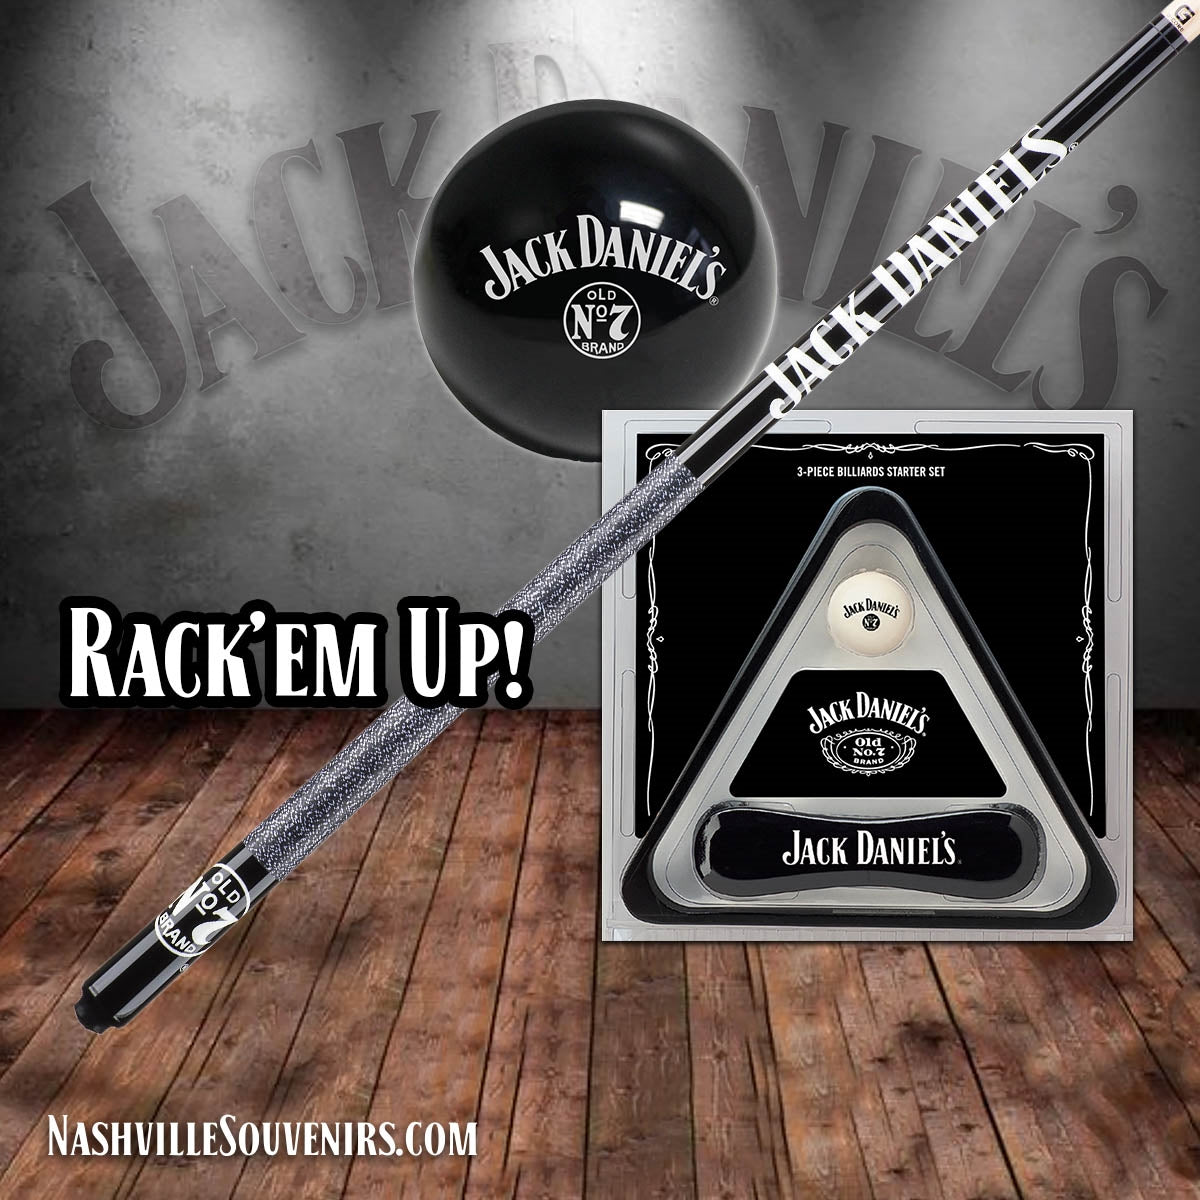 This may be one of the best man cave gift ideas of all time for Jack Daniel's lovers. This Jack Daniel's Pool gift set includes a Jack Daniel's pool stick, an Old No.7 eight ball along with a Jack Daniel's cue ball, rack and table brush.